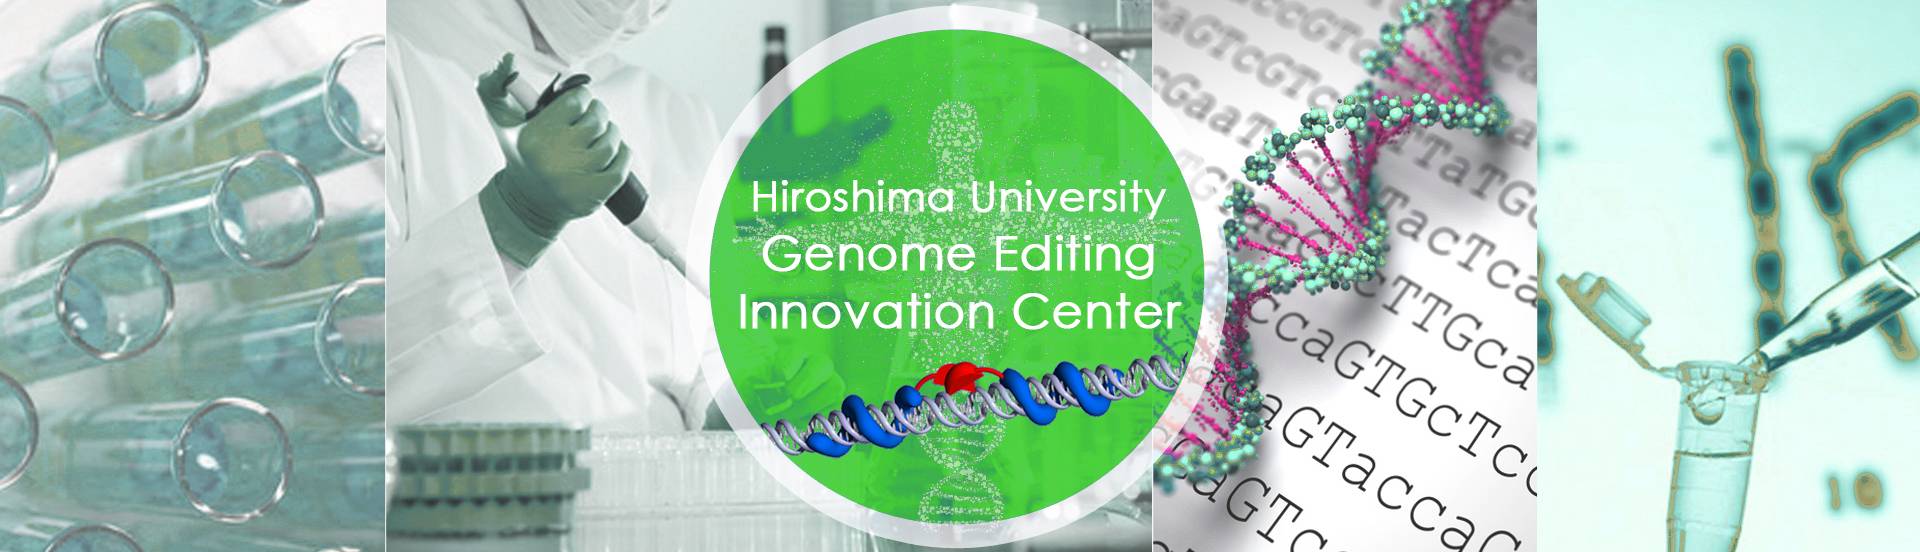 Research Center for Genome Editing